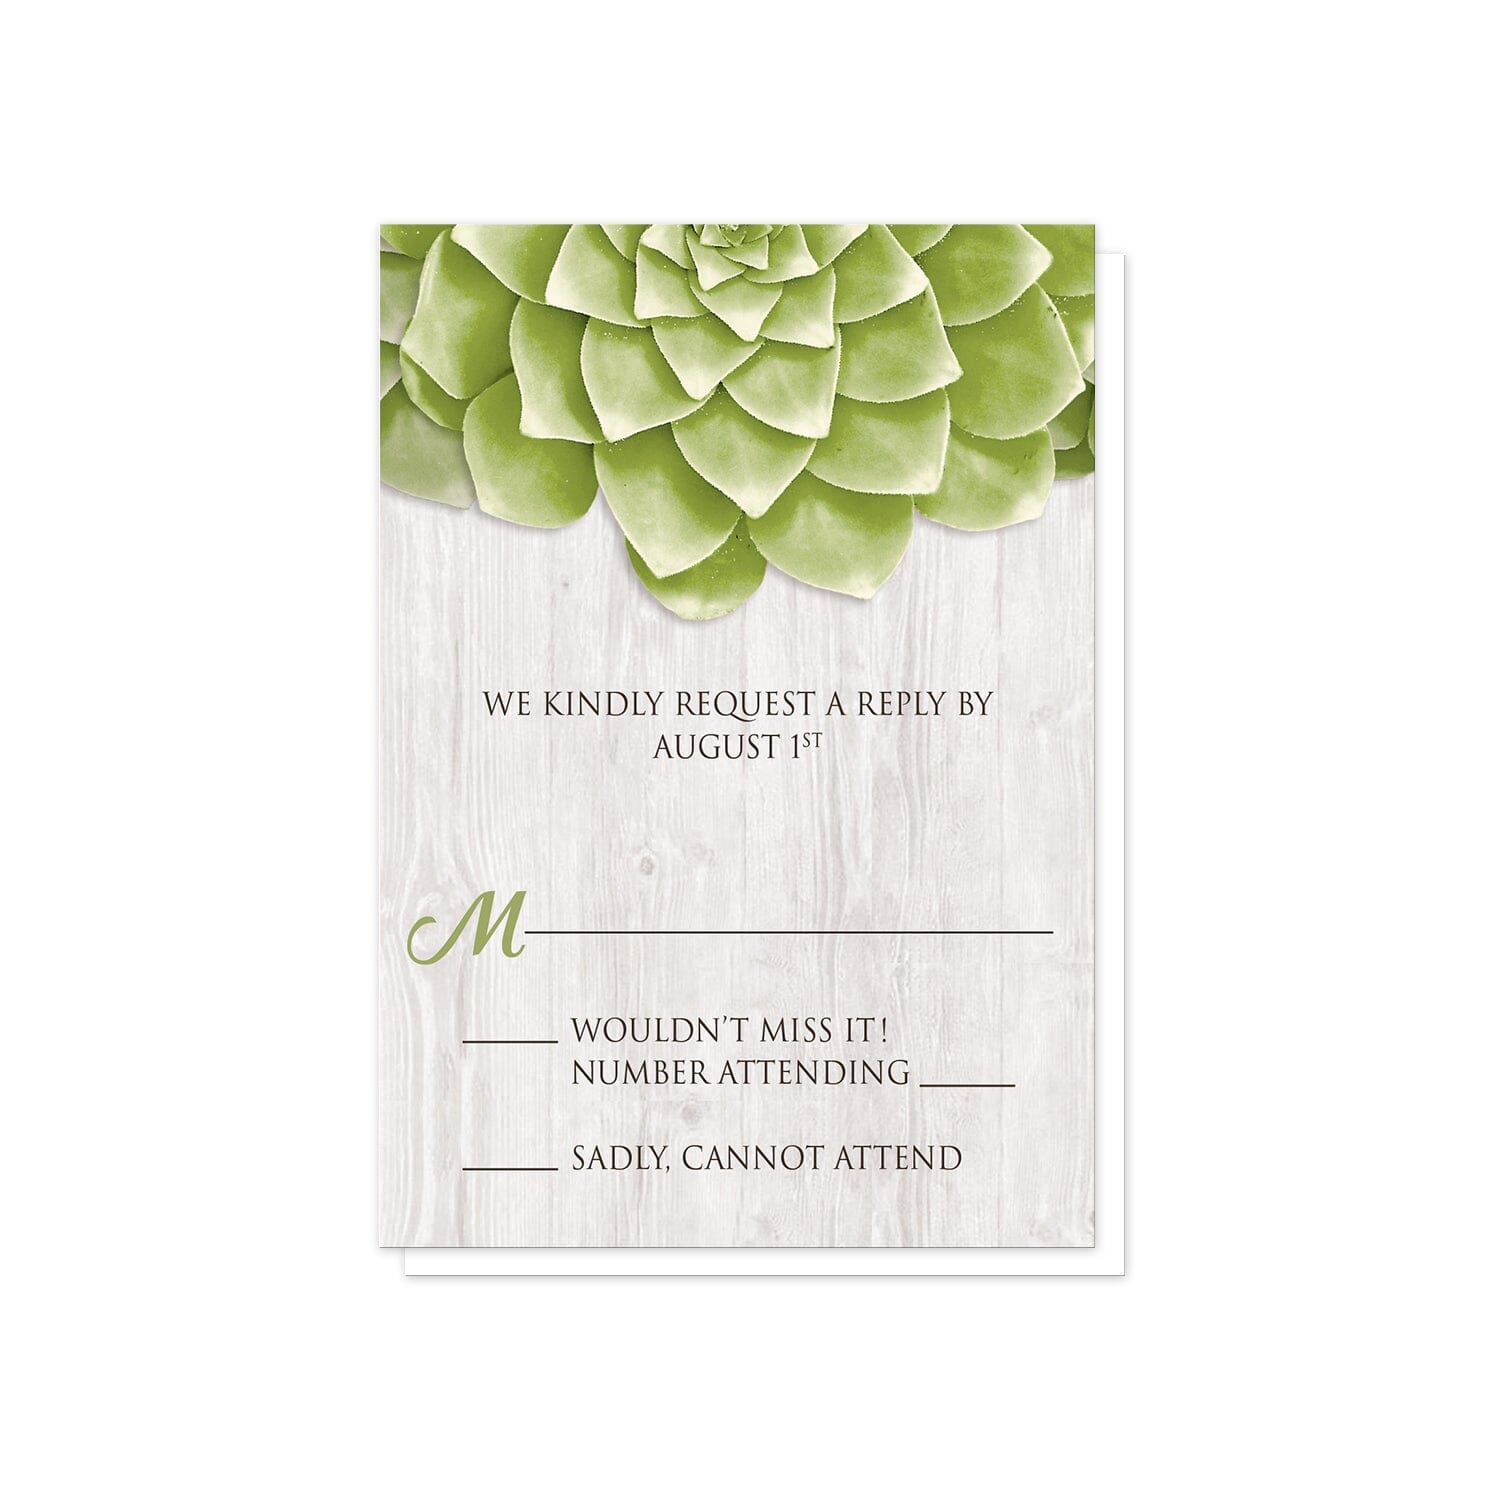 Succulent Whitewashed Wood RSVP Cards at Artistically Invited.